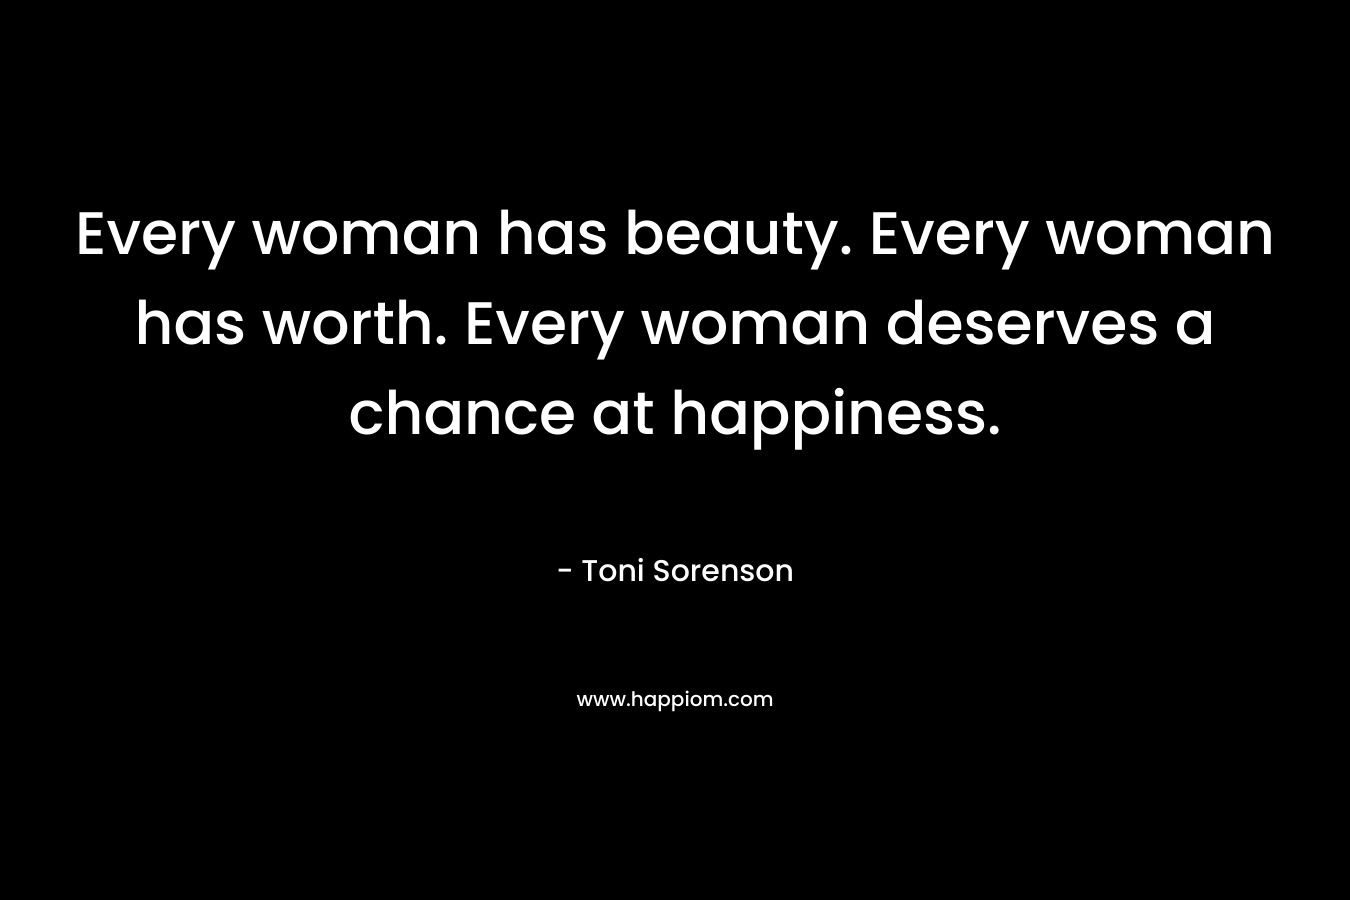 Every woman has beauty. Every woman has worth. Every woman deserves a chance at happiness.